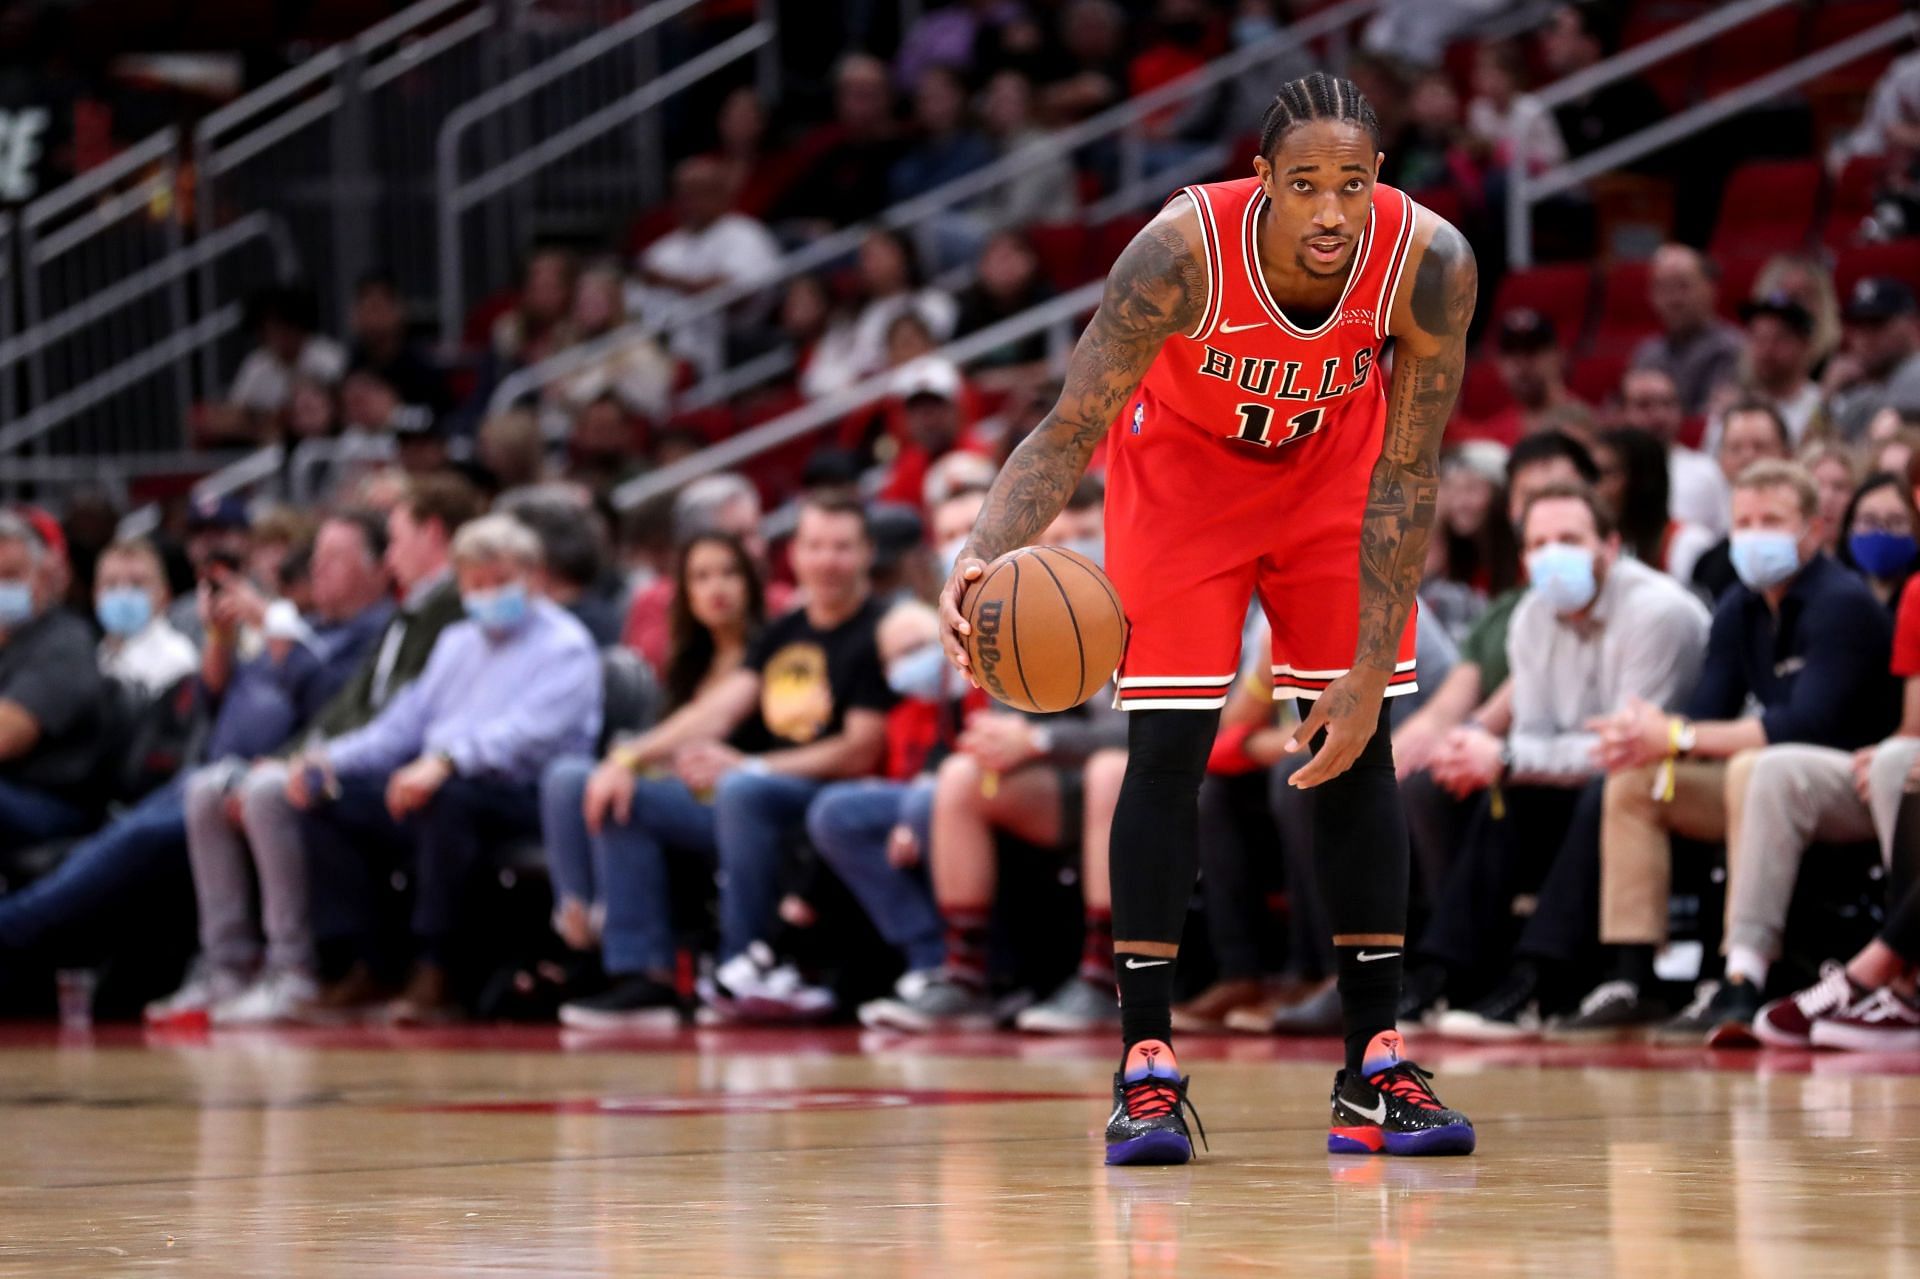 Chicago Bulls wing DeMar DeRozan has been cleared to return to the court